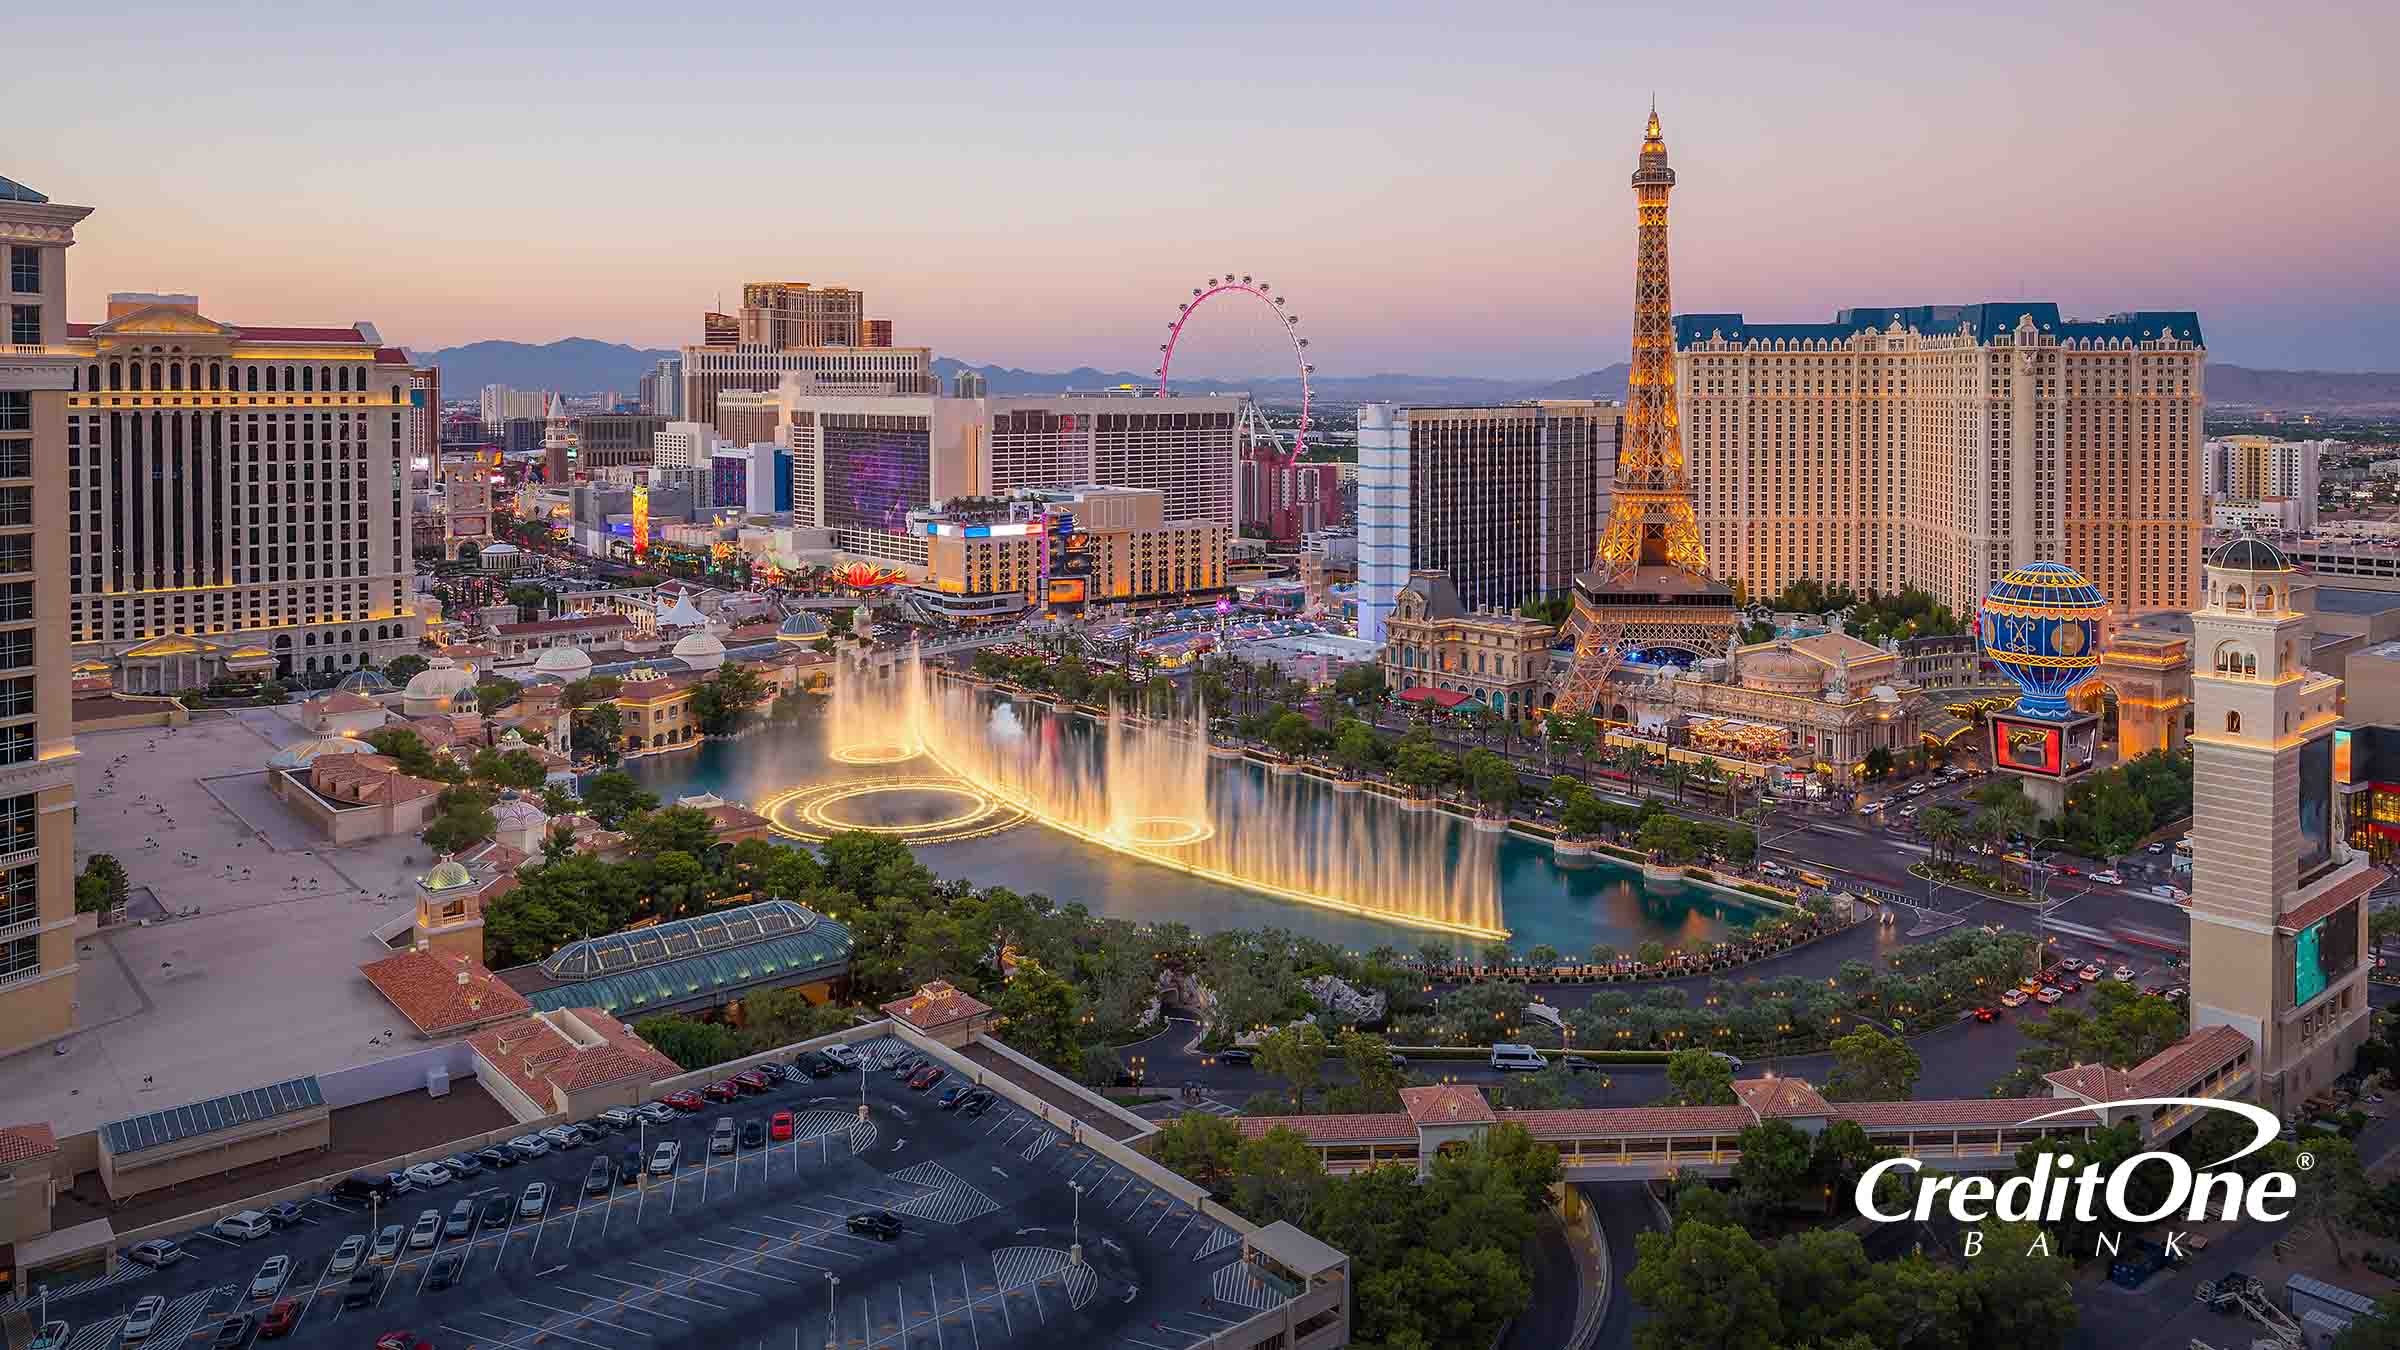 The Eiffel Tower Experience in Las Vegas - Travel Pockets